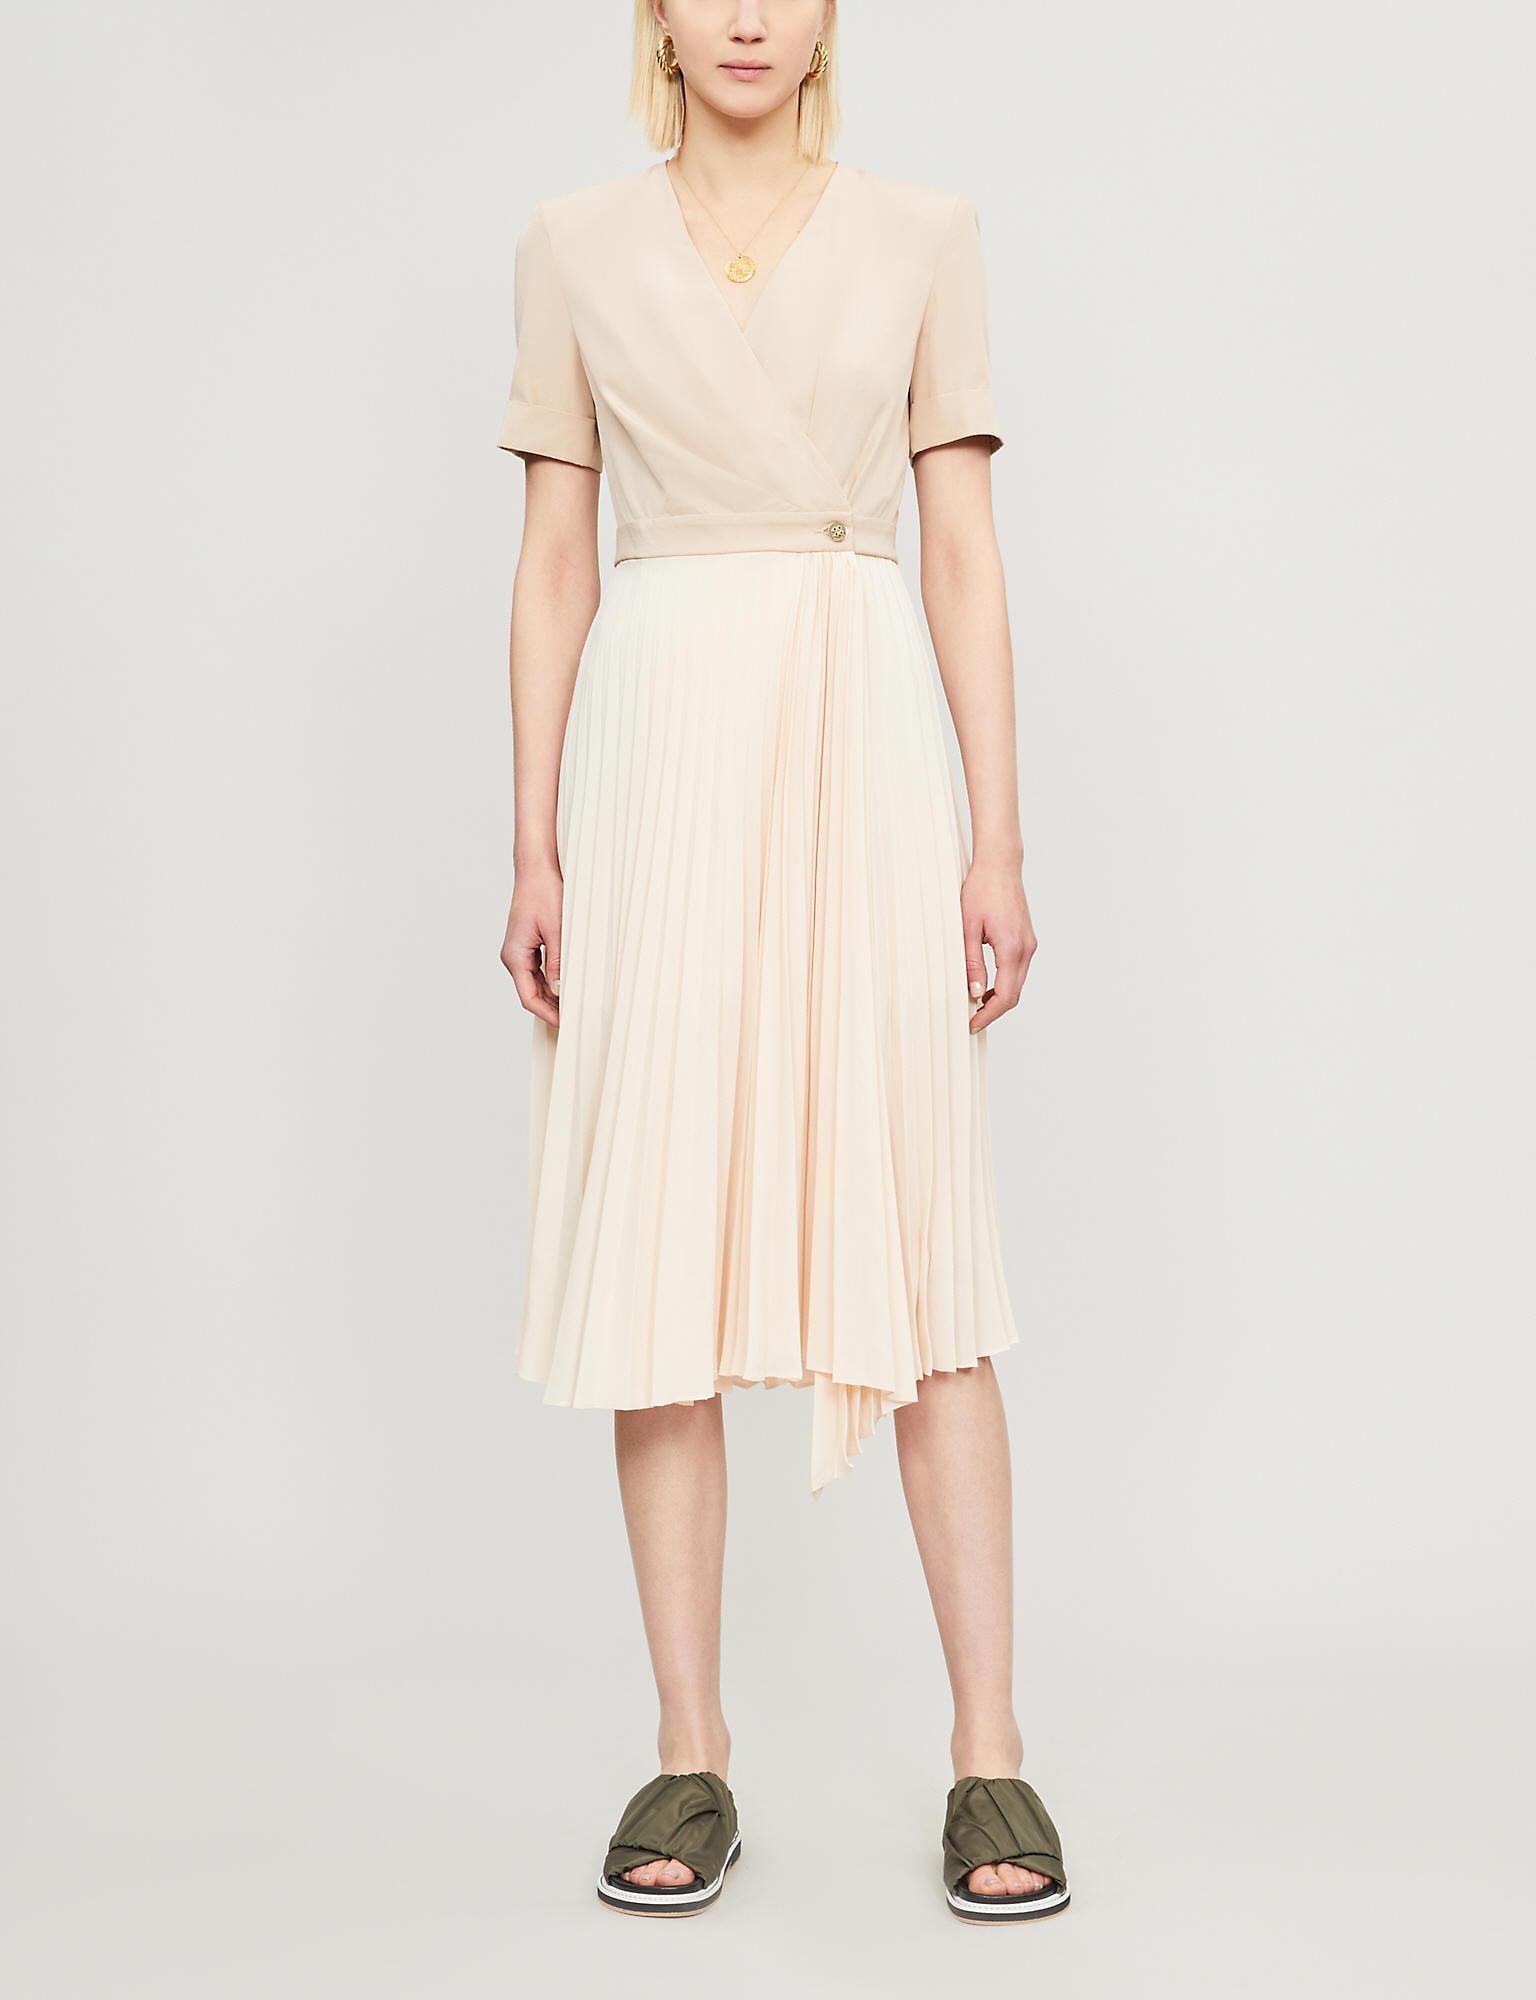 Sandro Gladis 2-in-1 Wrap Dress in Nude (Natural) | Lyst Canada